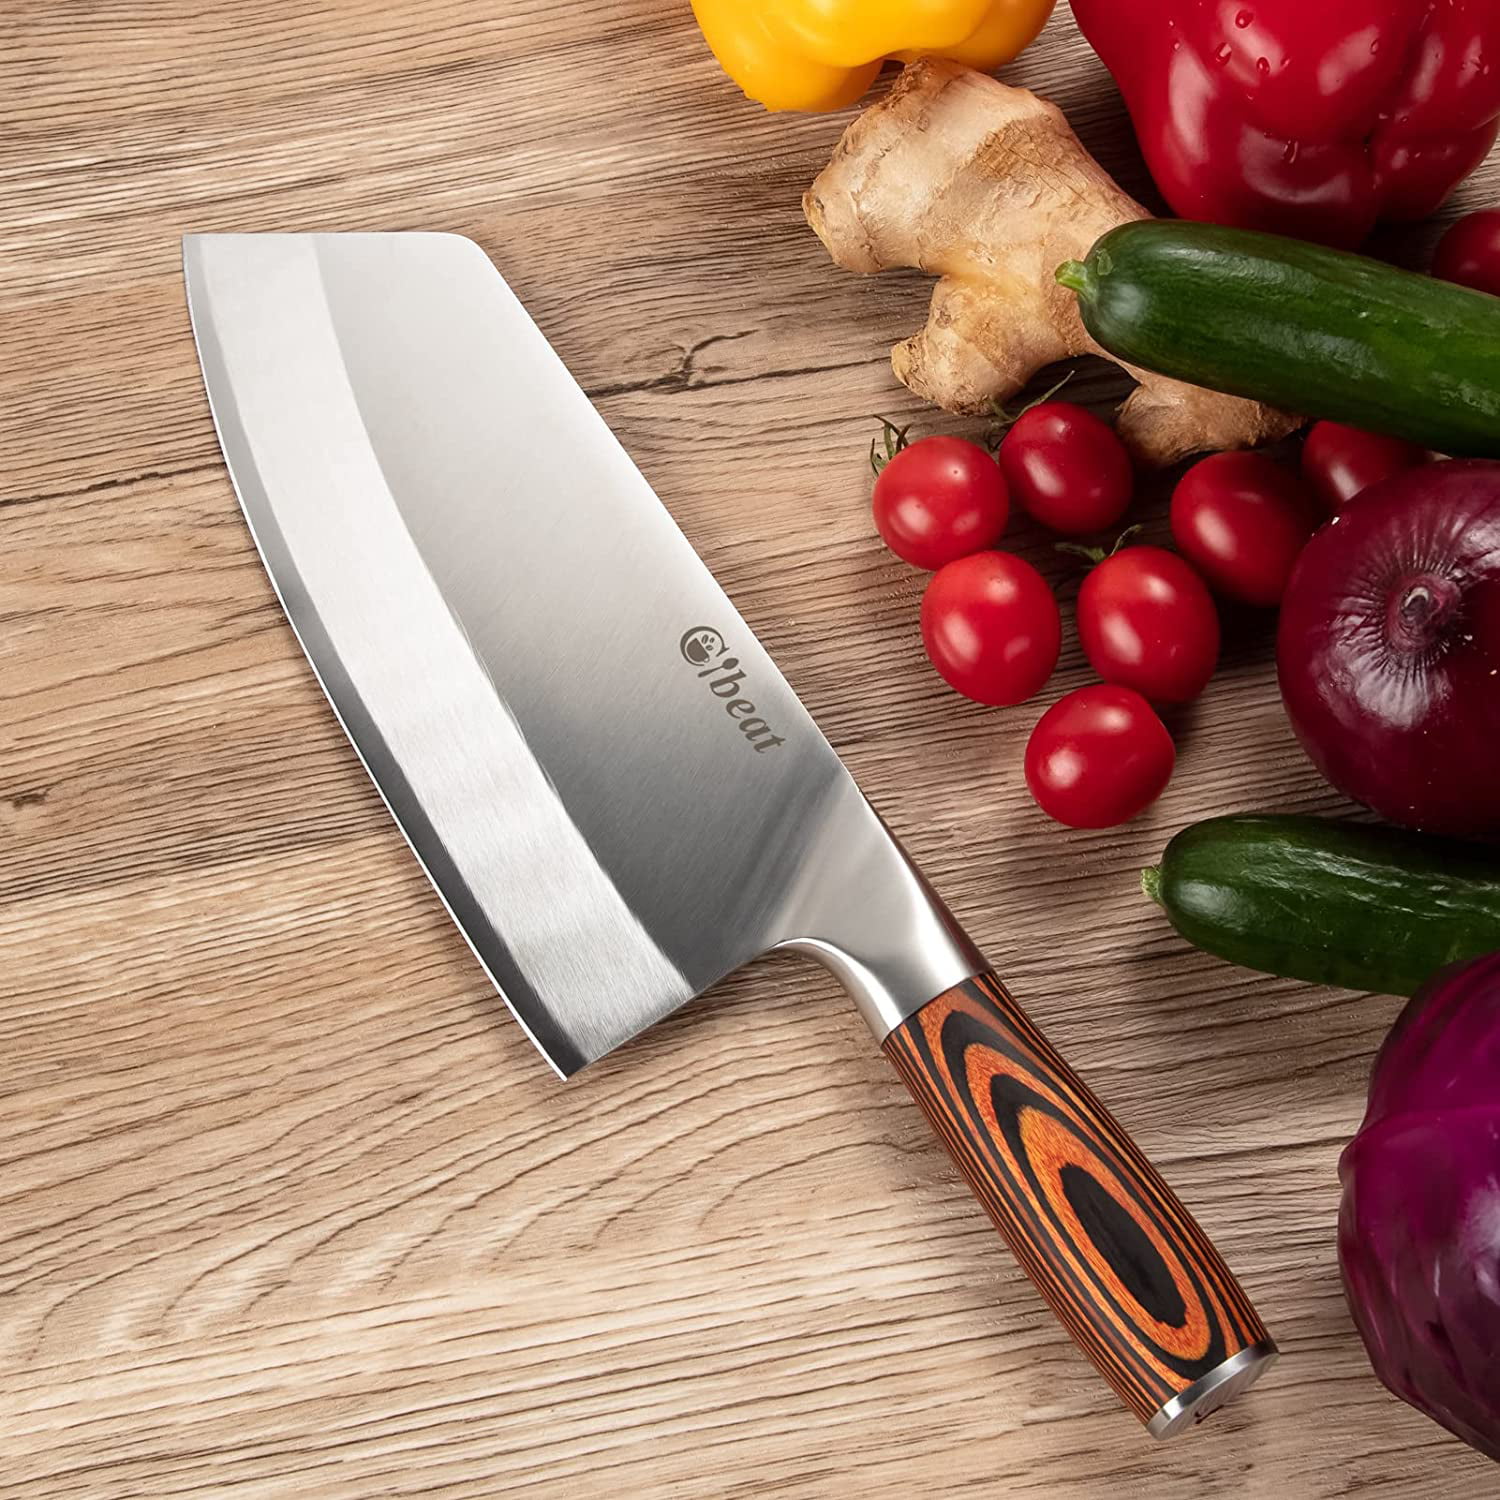 Kitcheniva Stainless Steel Chopping Knife With Box, 1 Pcs - Ralphs